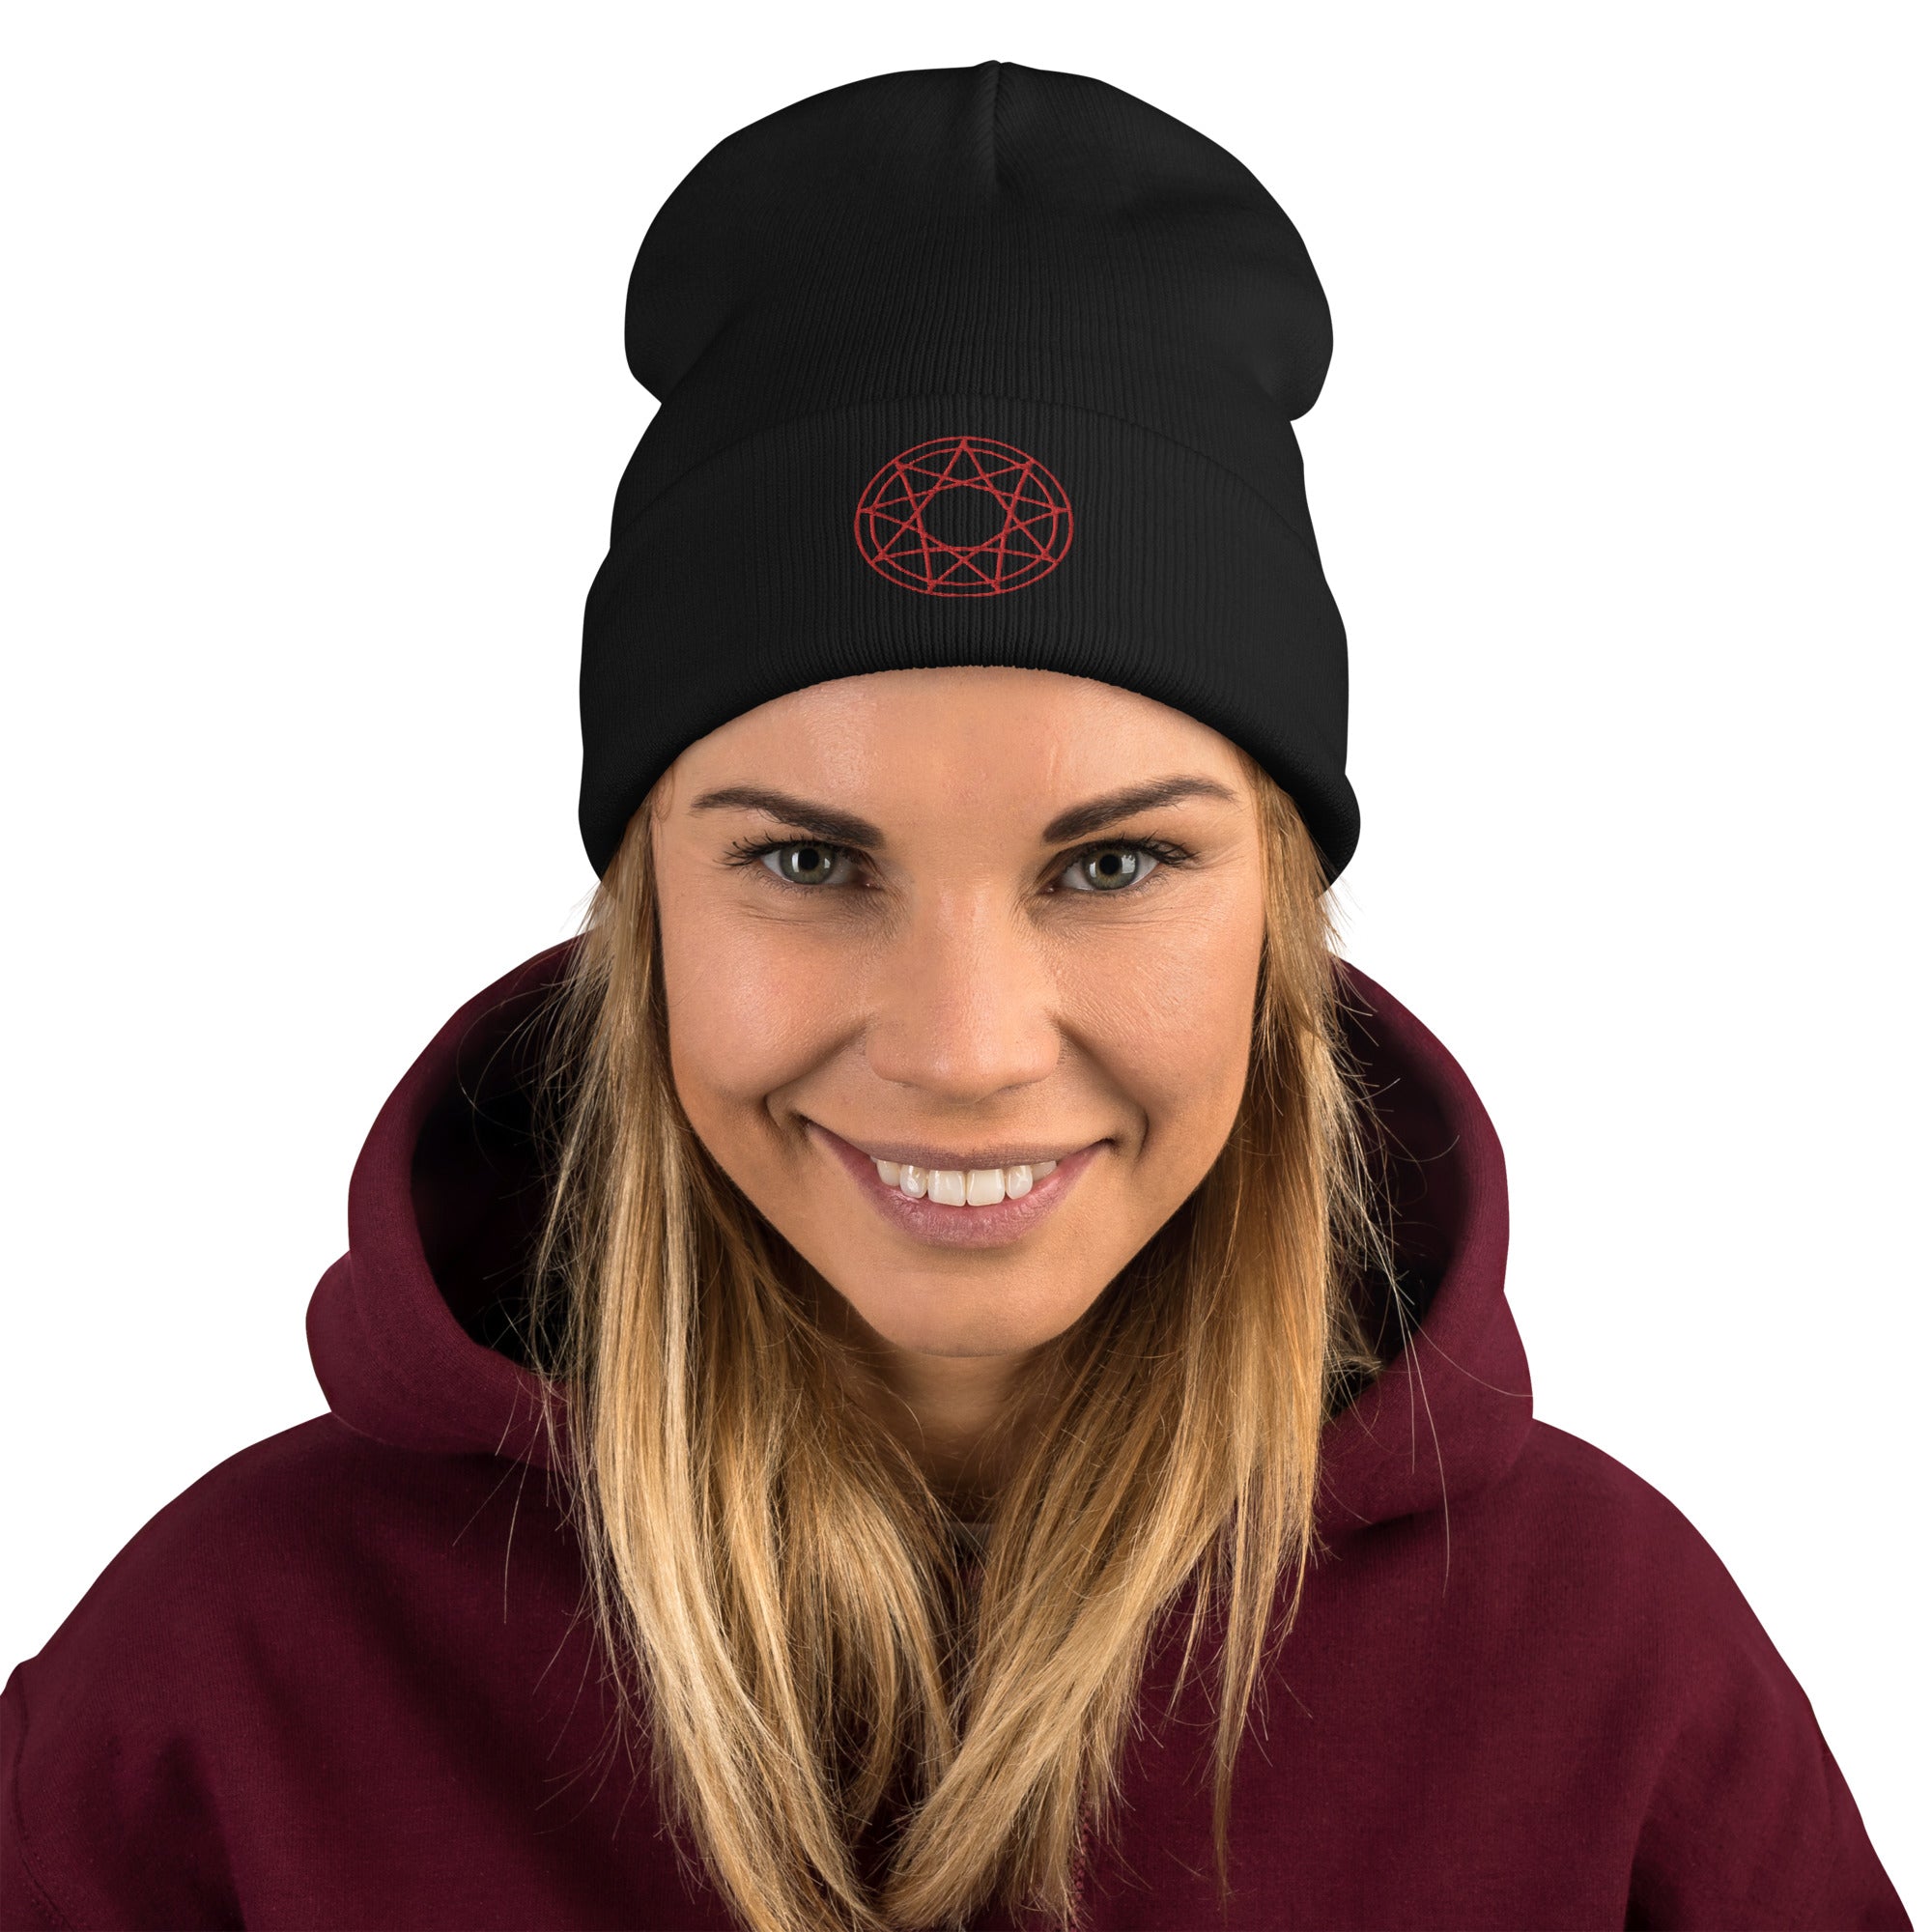 9 Point Star Pentagram Occult Symbol Embroidered Cuff Beanie Slipknot Red Thread - Edge of Life Designs